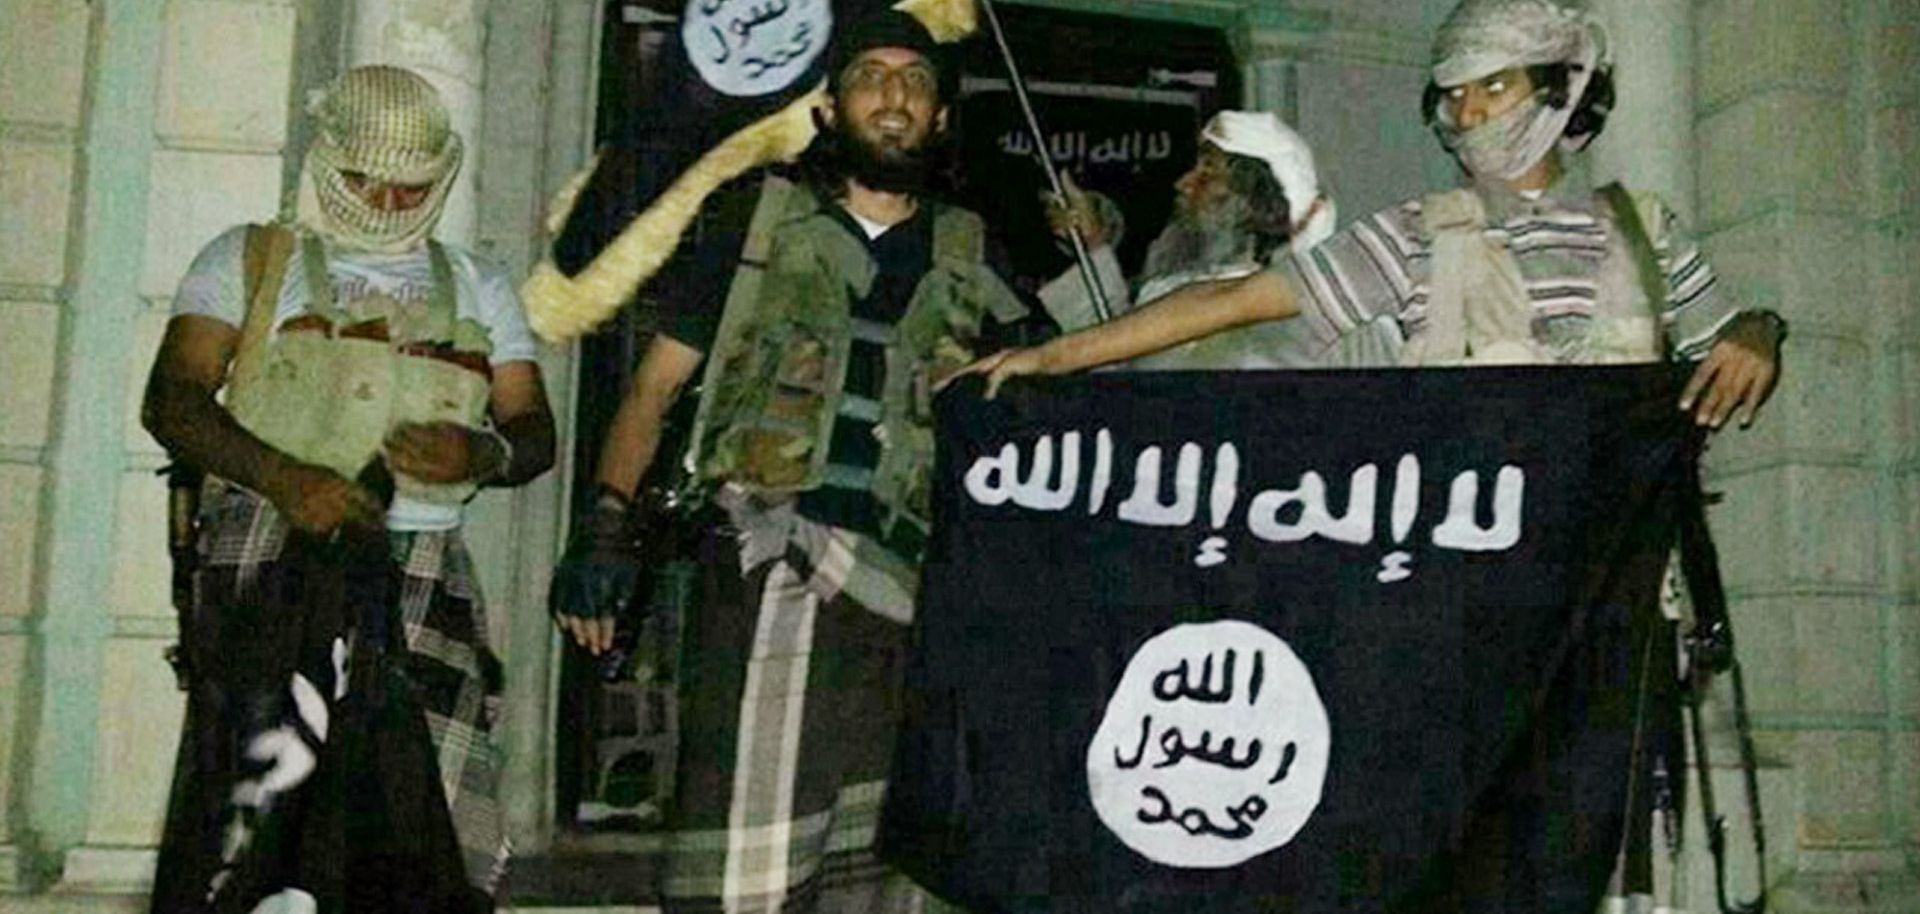 A picture taken with a mobile phone early on May 24, 2014 shows Al-Qaeda militants posing with Al-Qaeda flags in front of a museum in Seiyun, second Yemeni city of Hadramawt province, after launching a massive pre-dawn assault that killed at least 15 soldiers and police. The assault in Hadramawt, a jihadist stronghold that has seen large-scale attacks on the army in the past, came as troops pressed a month-old ground offensive against Al-Qaeda in Abyan and Shabwa provinces to the west. AFP PHOTO / STR (Phot